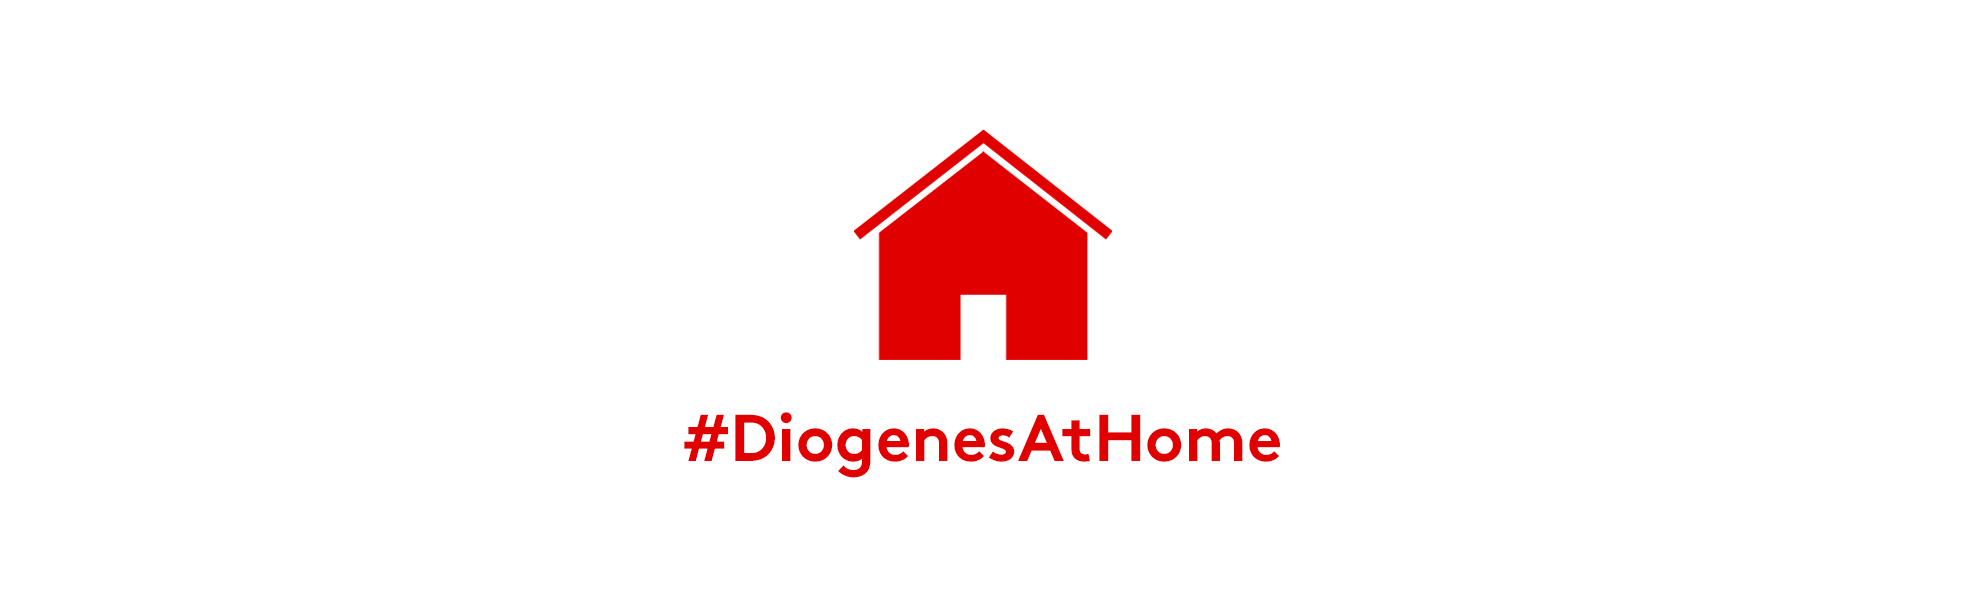 <p>Diogenes At Home</p>
